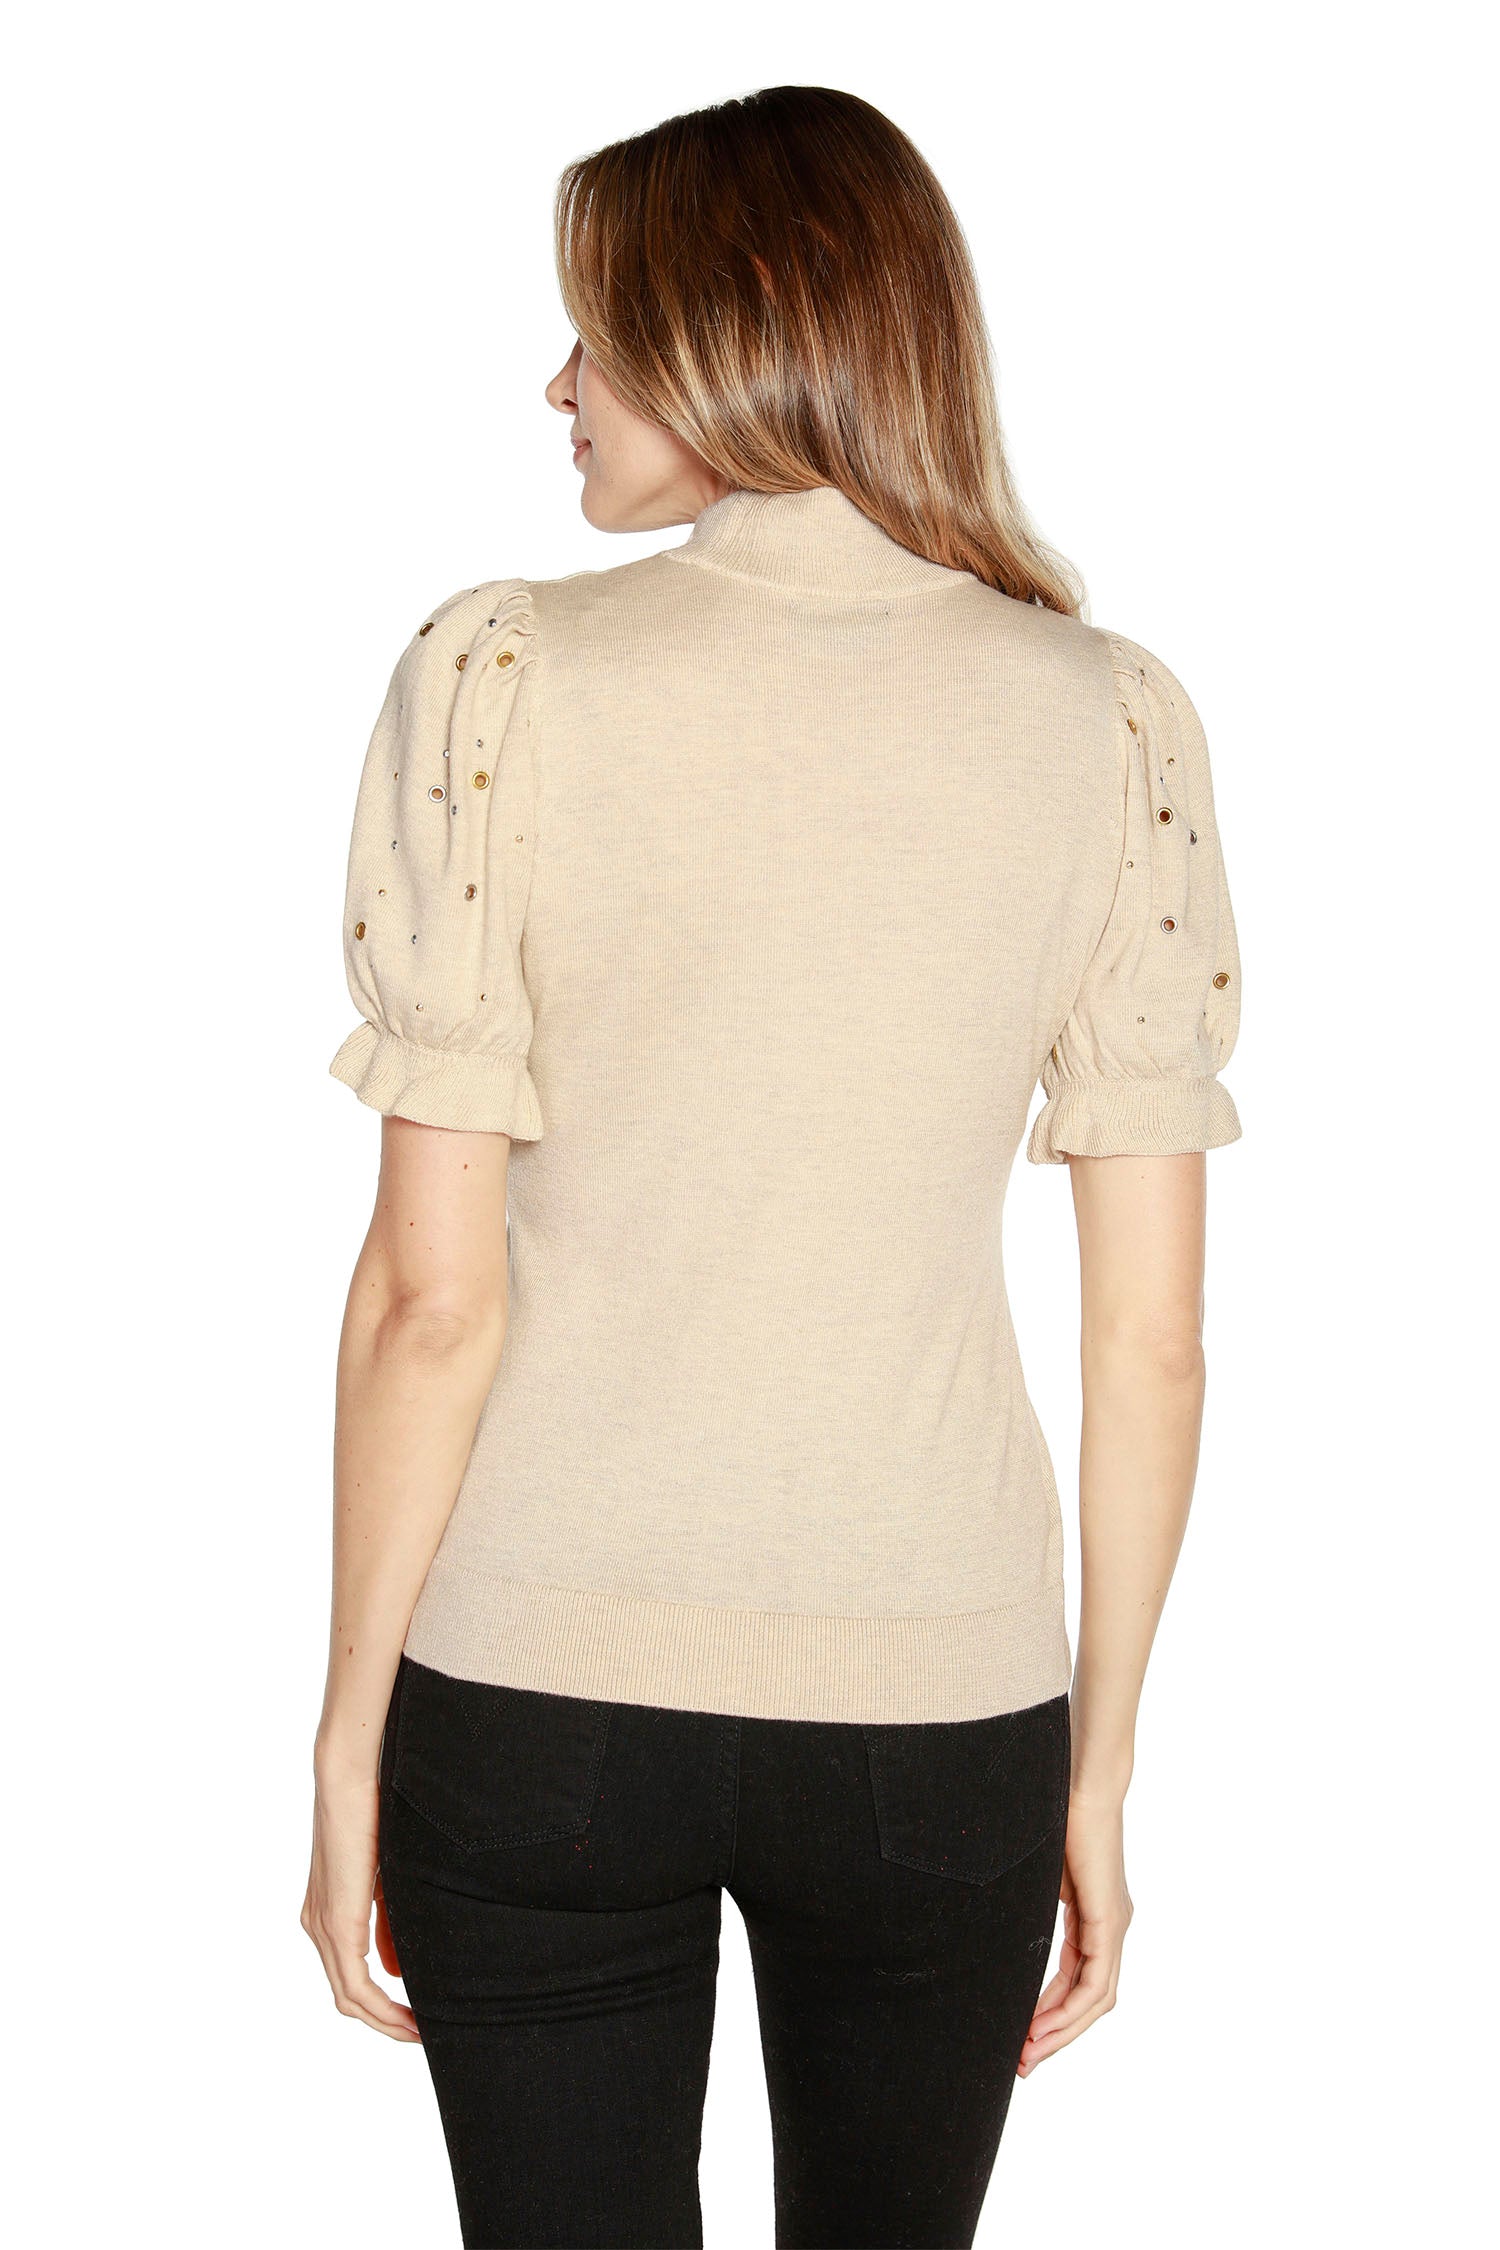 Women's Mock Neck Puff Sleeve Sweater with Grommet and Rhinestone Details